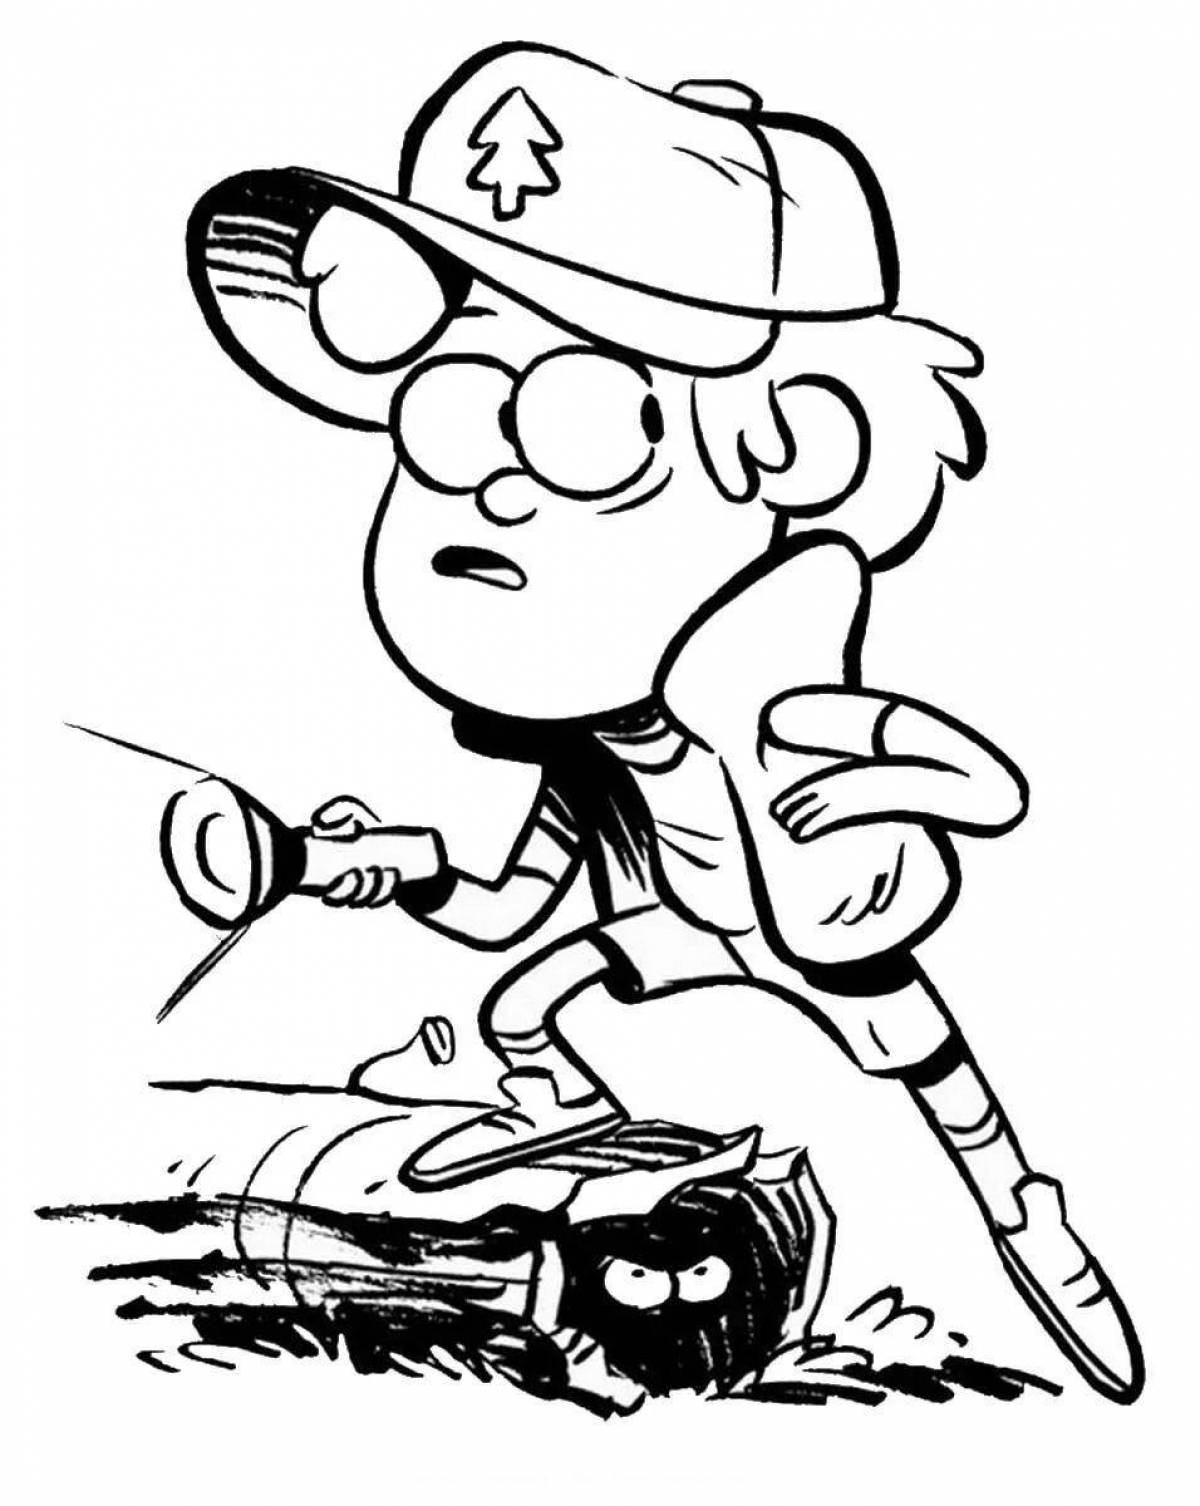 Exciting dipper pines coloring book